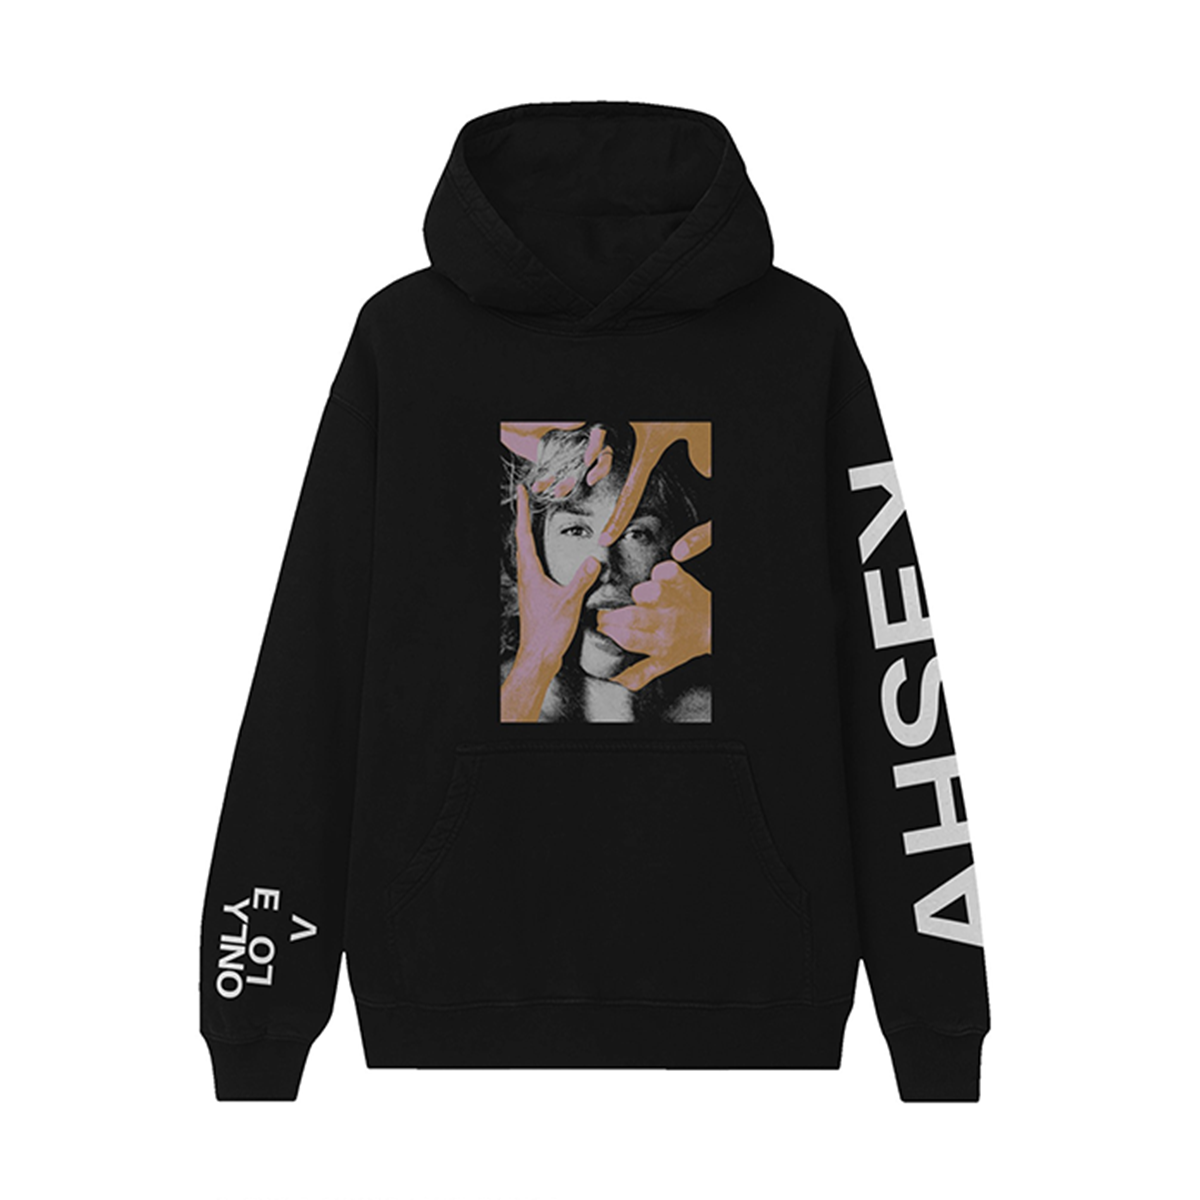 Only Love Tour 2023 Hoodie